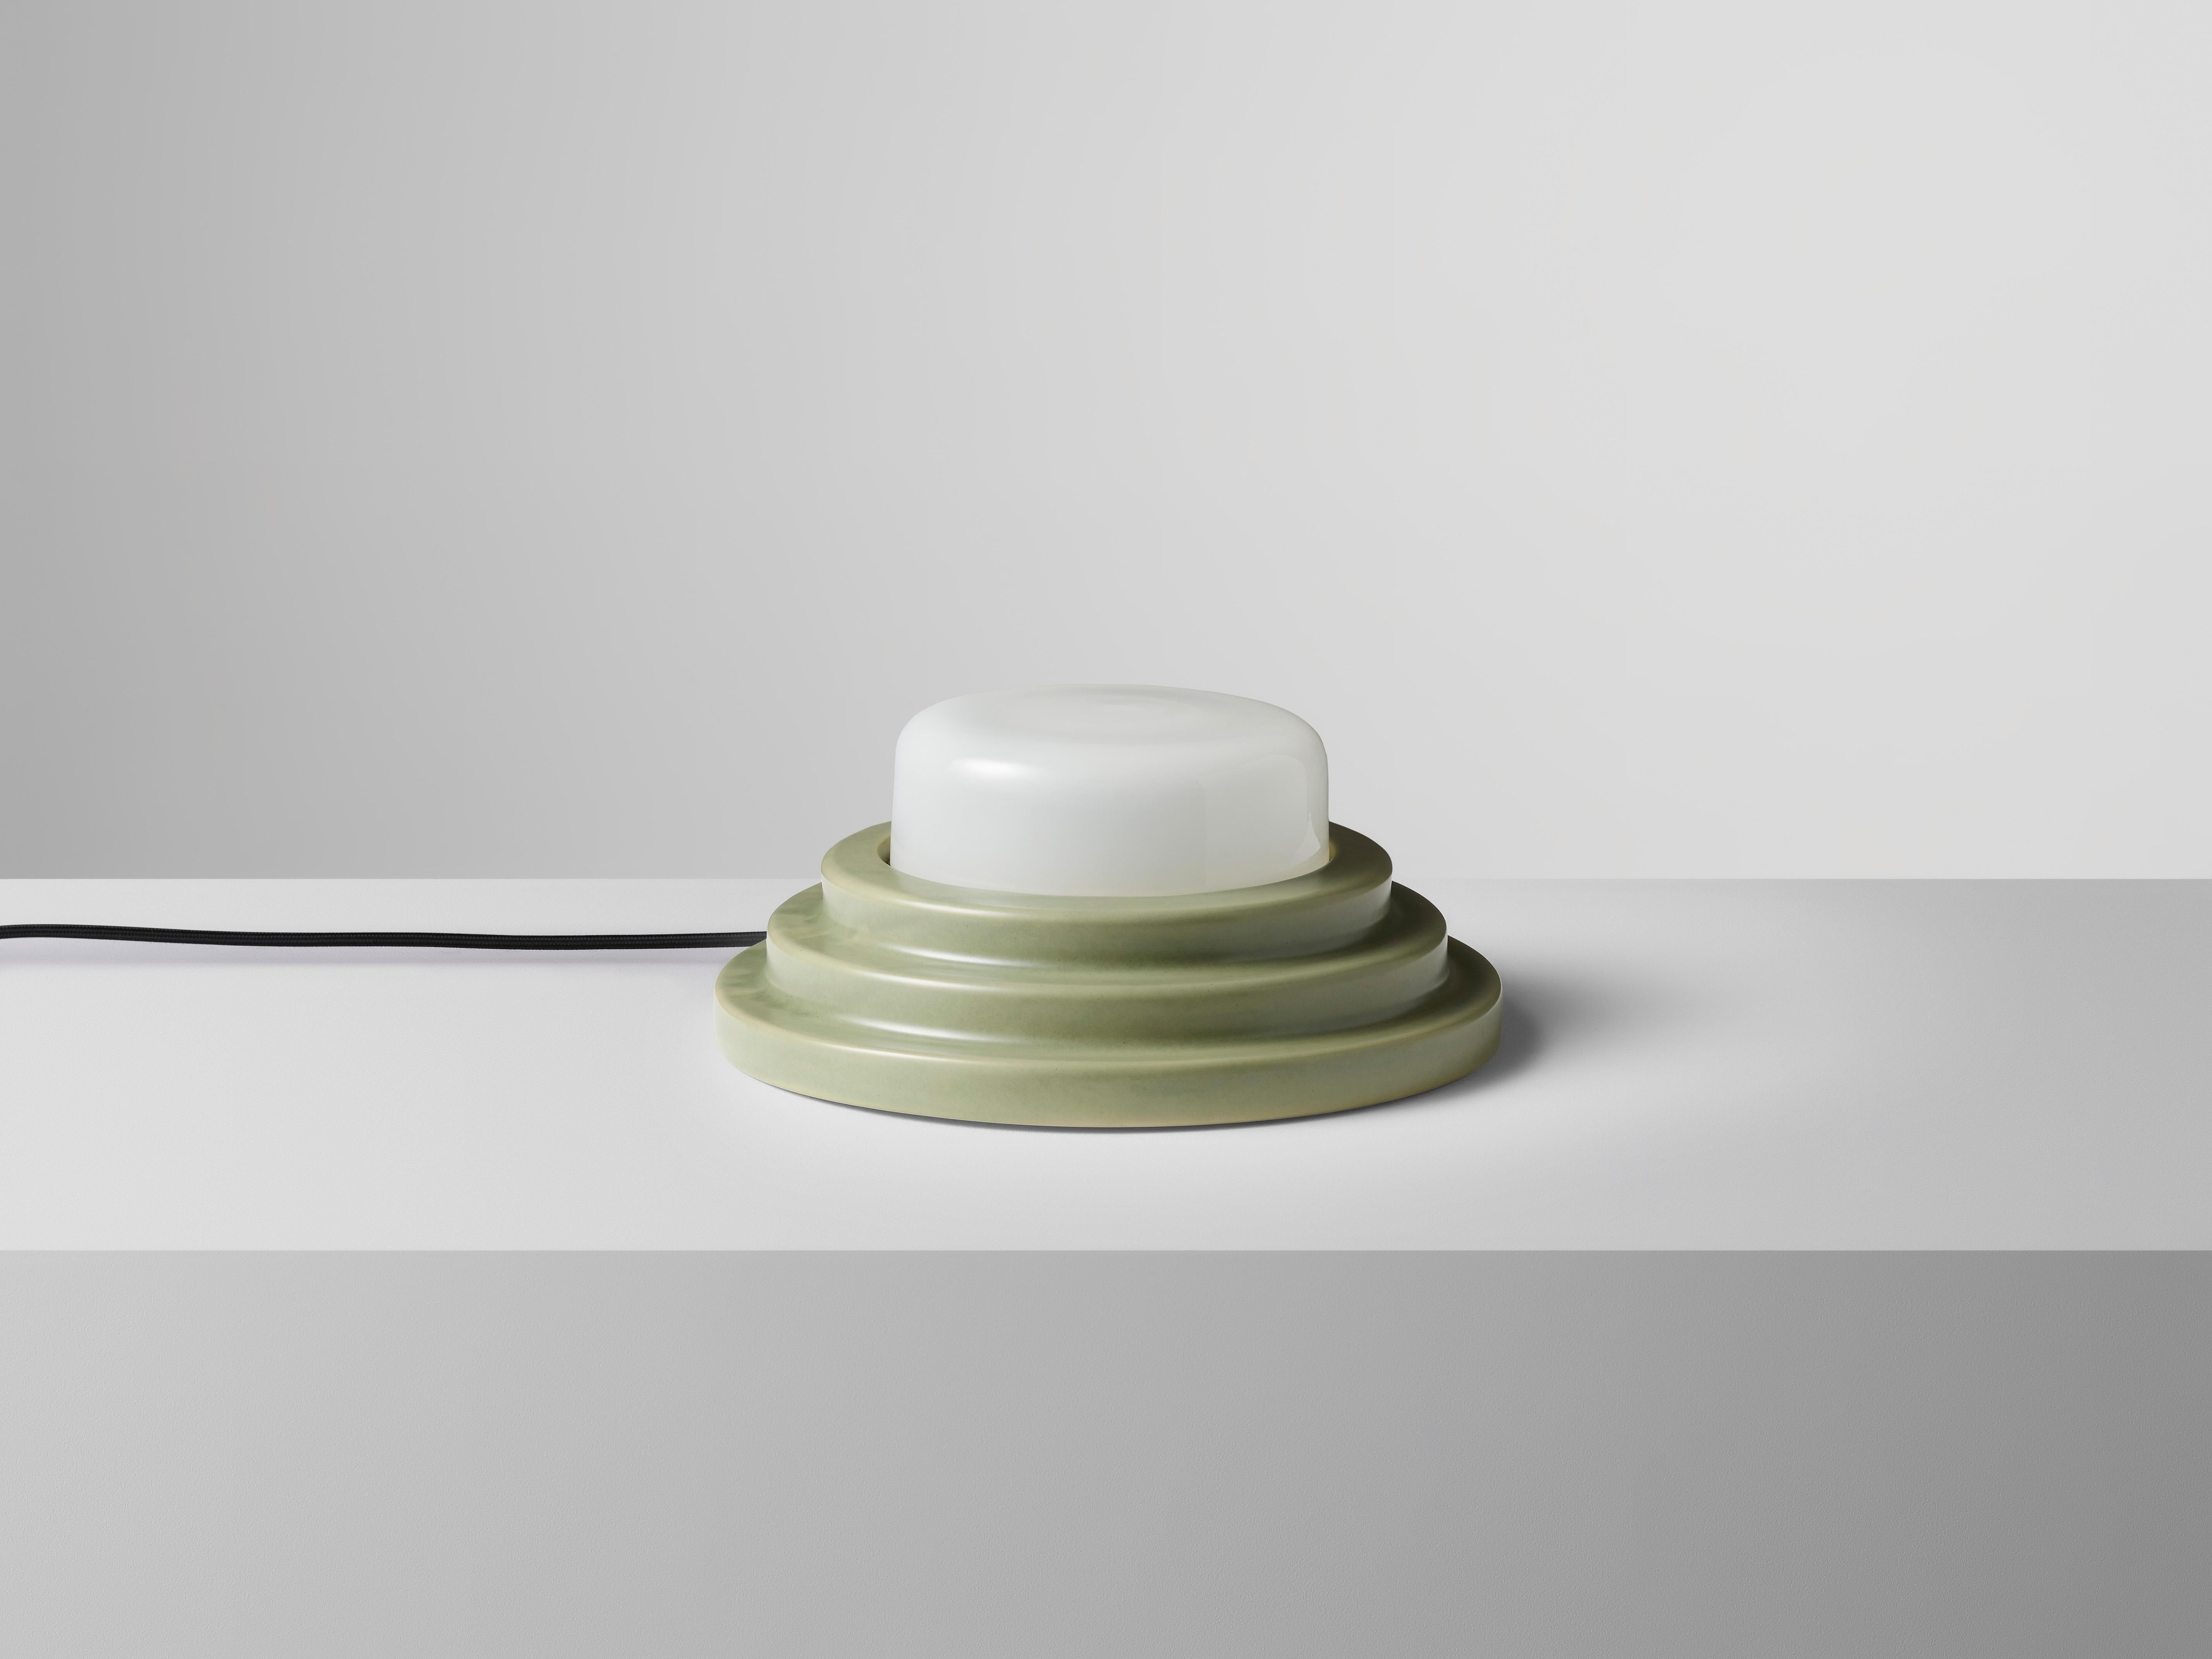 Green Honey Table Lamp by Coco Flip
Dimensions: D 30 x W 30 x H 12 cm
Materials: Slip cast ceramic stoneware with blown glass. 
Weight: 4kg

Standard fixtures included
1 x ceramic G9 lamp holder
1 x dimmable 3.5W 3000K (warm white)
G9 LED globe 300